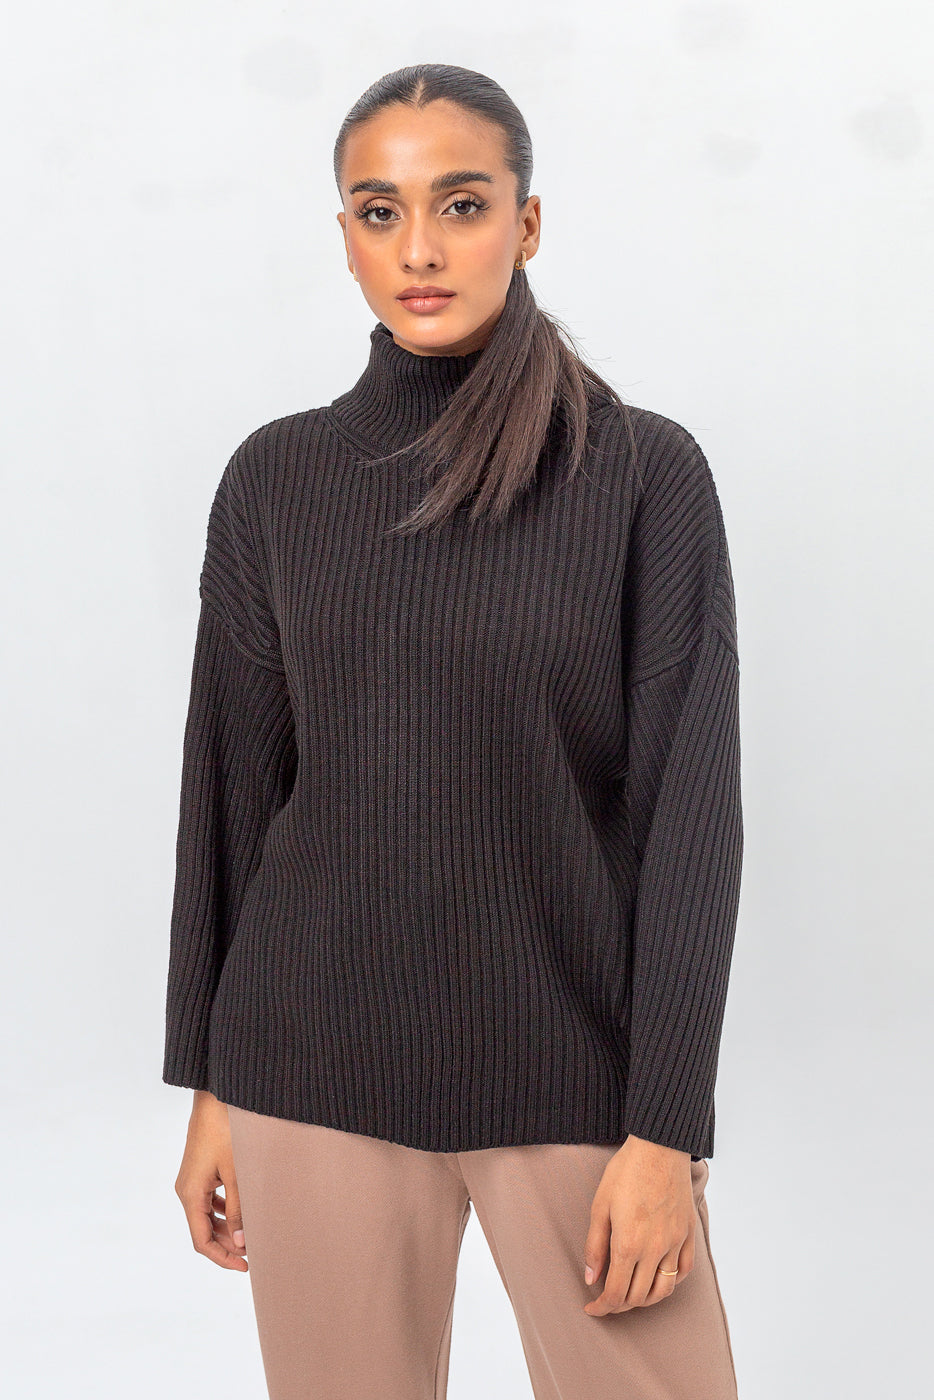 Ribbed Turtle Neck Sweater - BEECHTREE